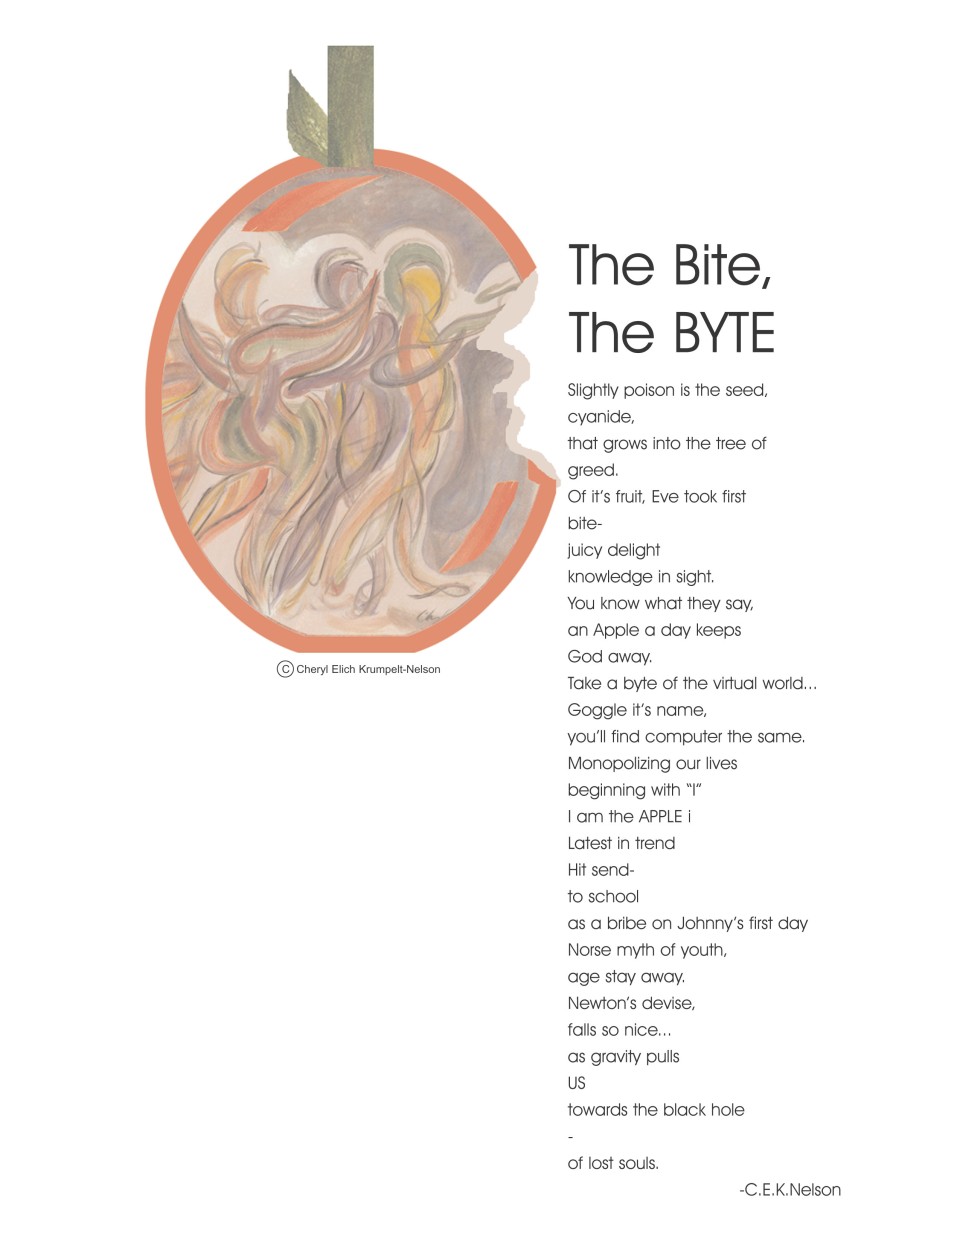 The Bite, The Byte by C,E.K. Nelson, illustration by the author